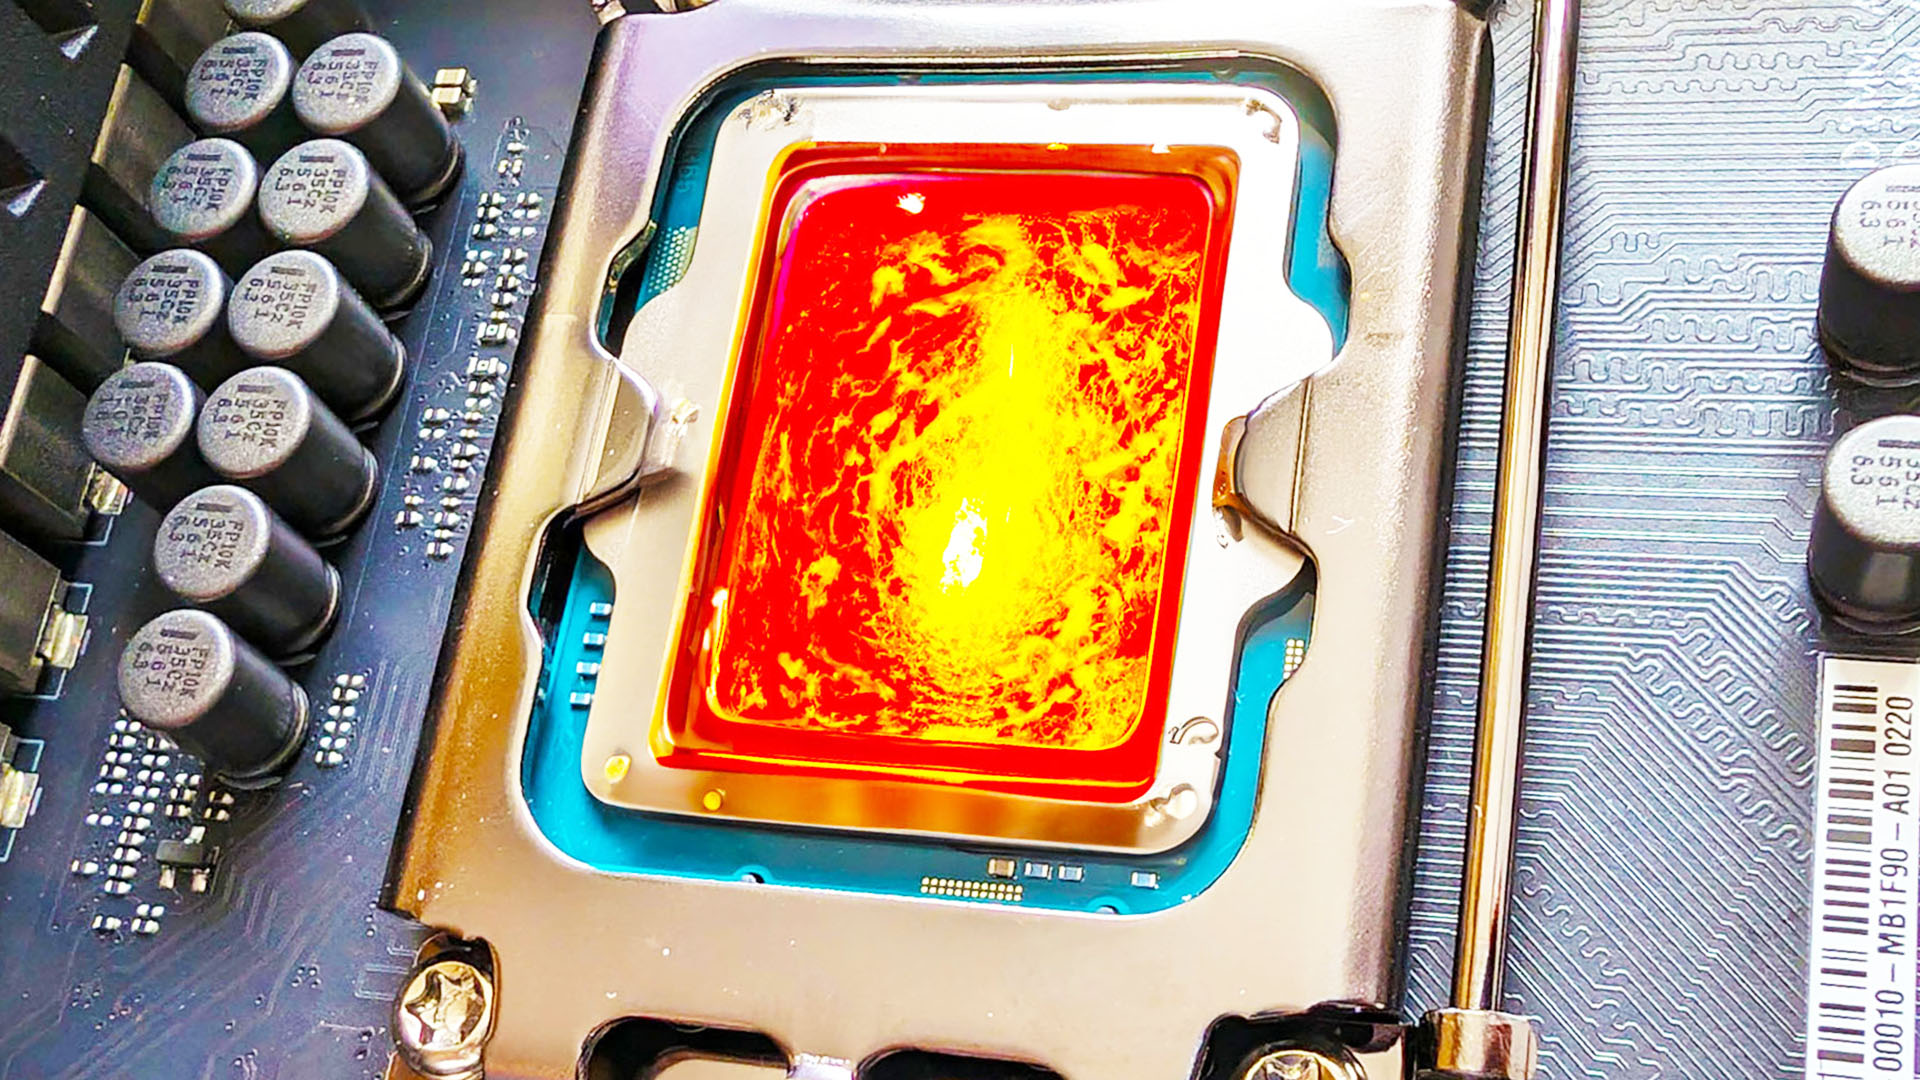 Intel just updated us on game crashes, and it's not looking good